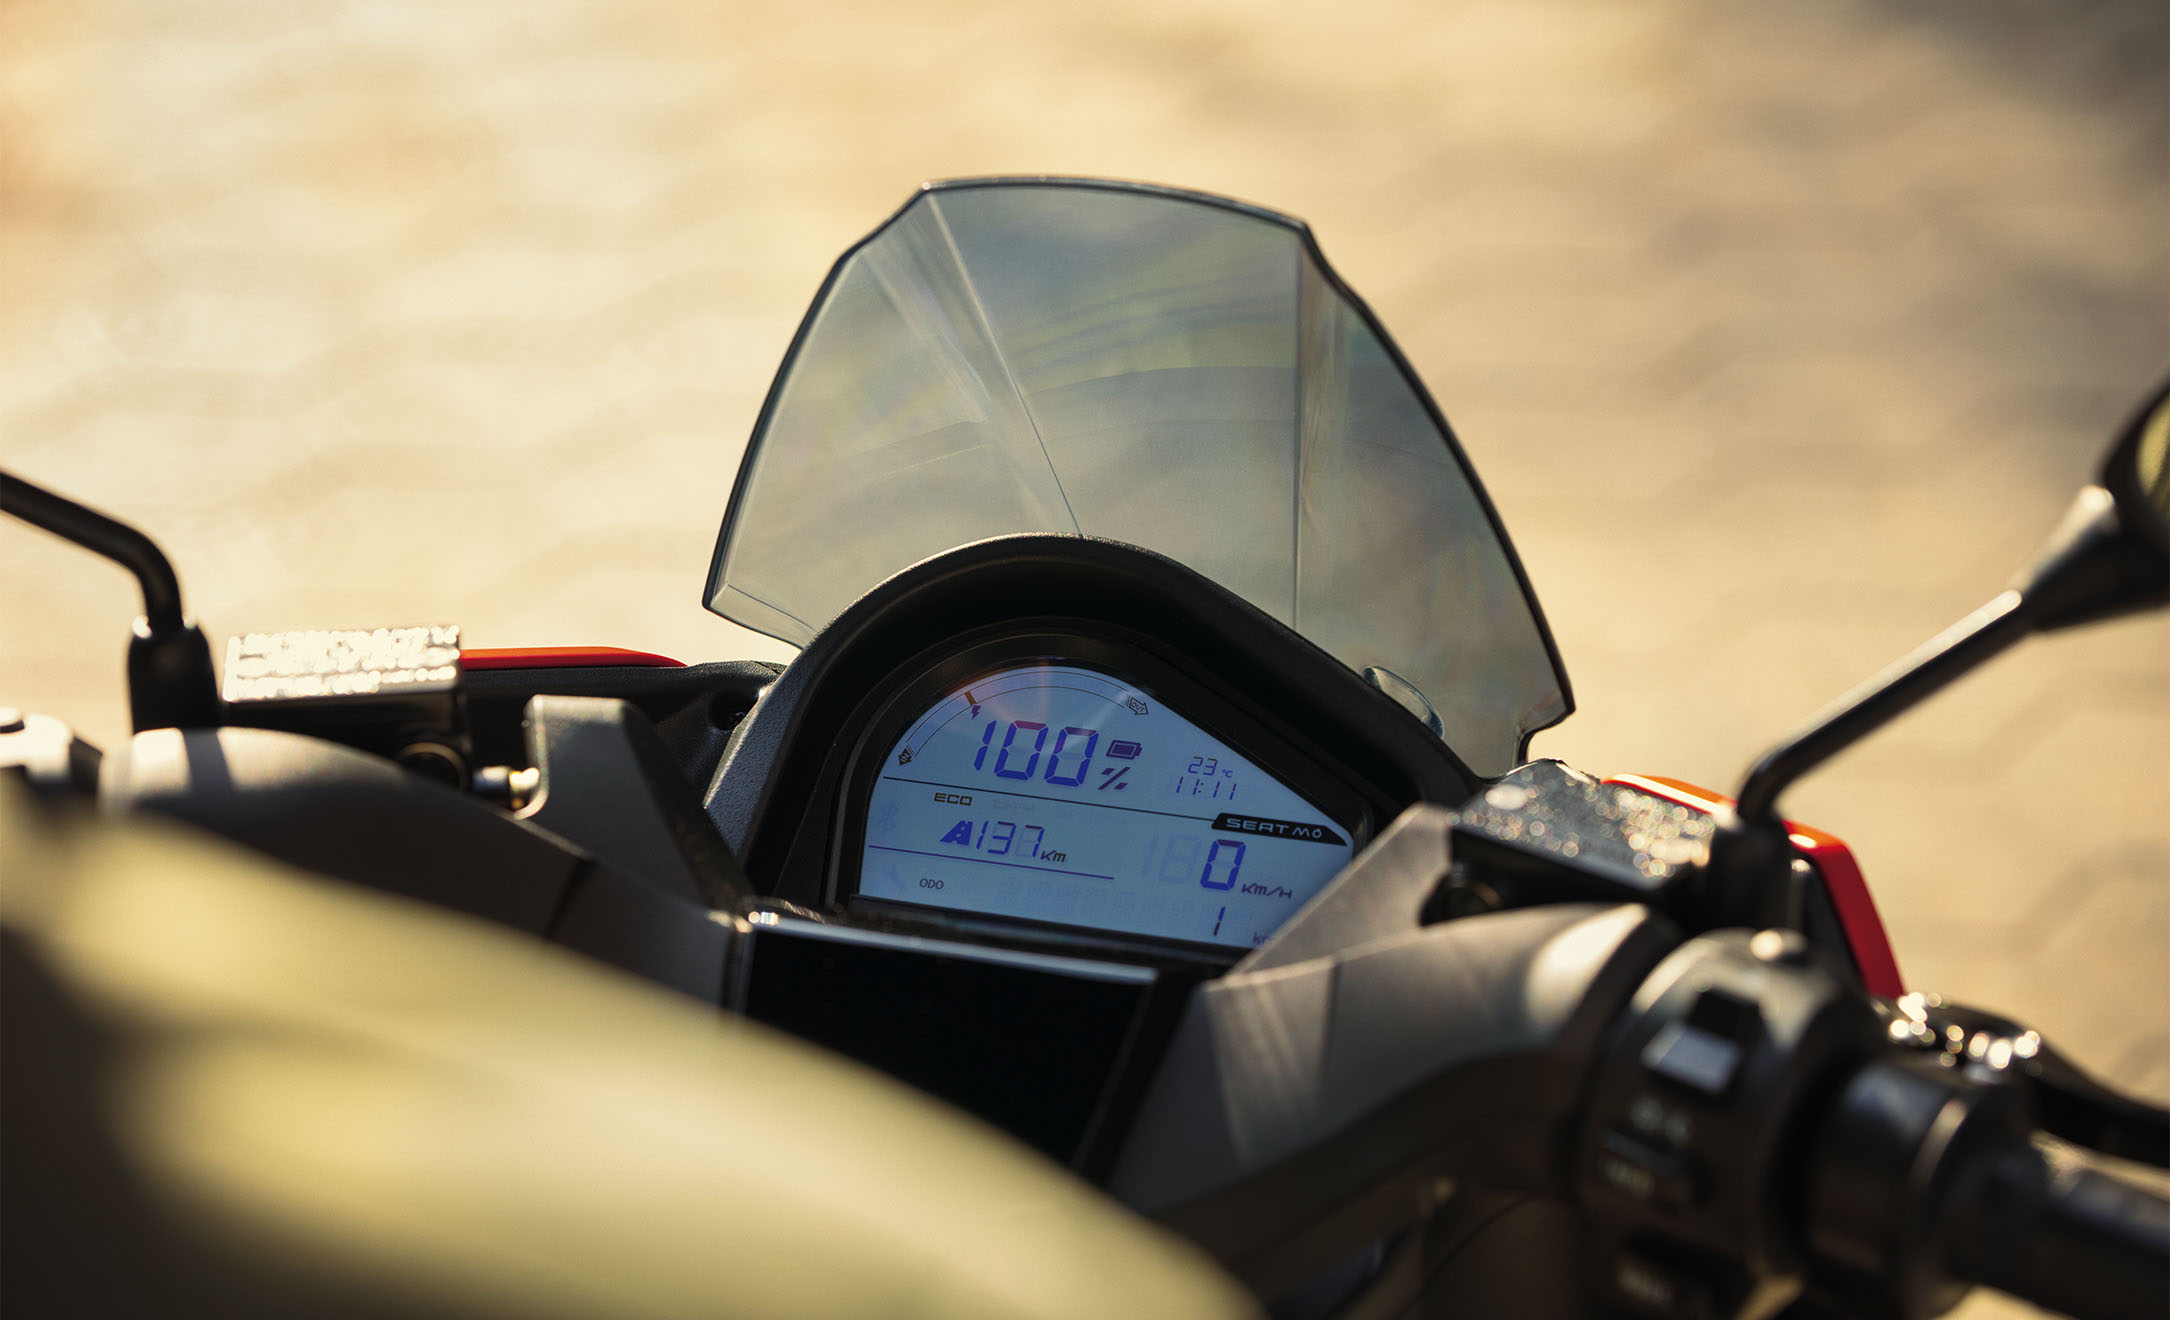 SEAT MÓ 125 riding modes electric motorcycle screen detail view